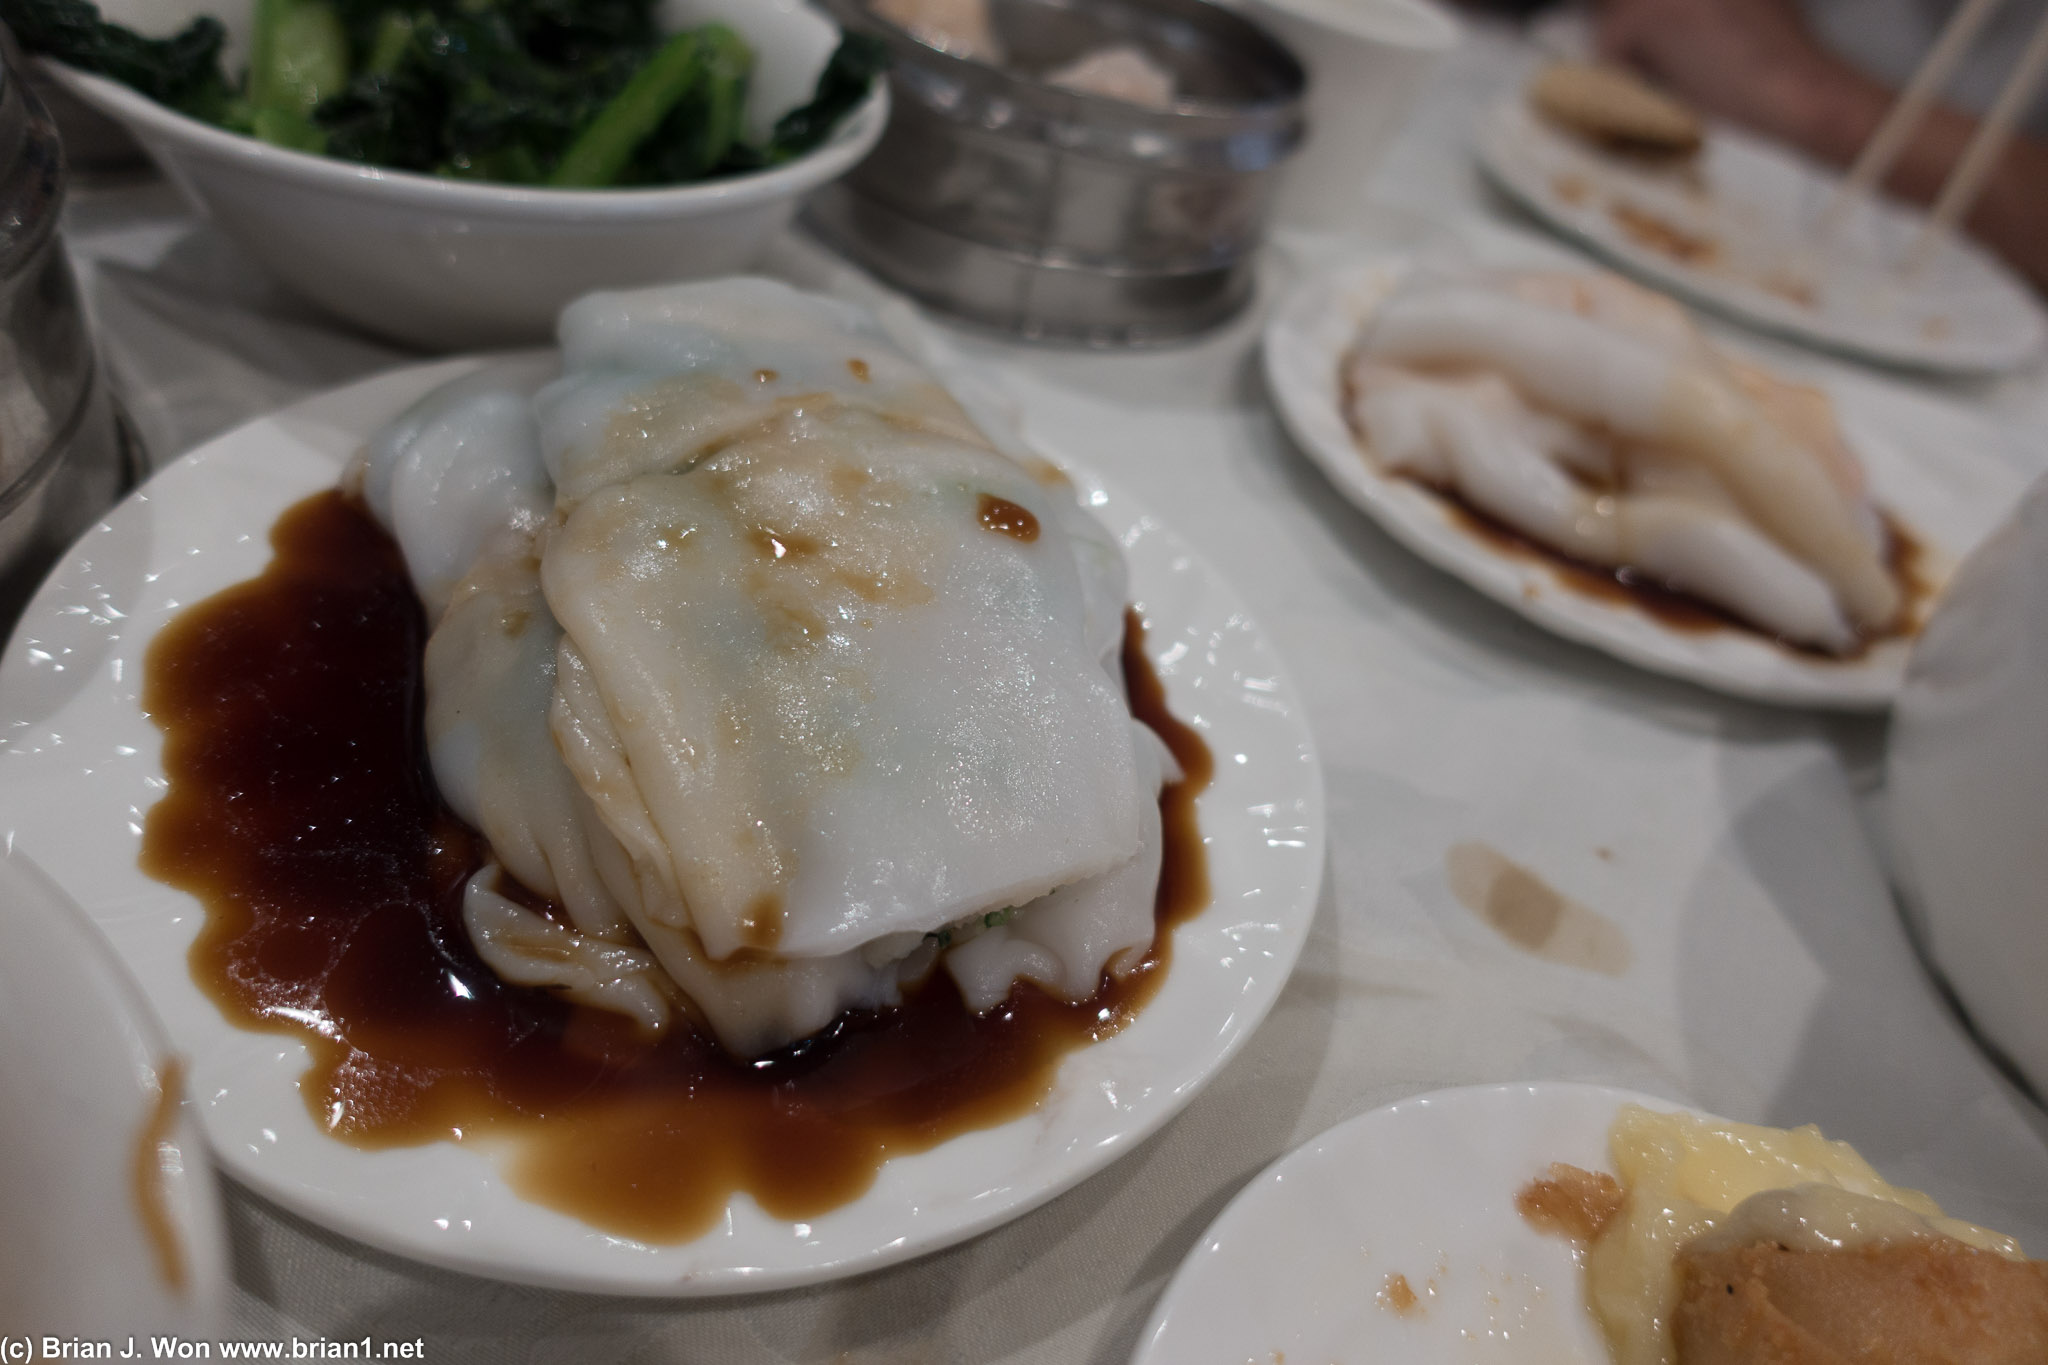 Har cheung fun and fish cheung fun. Latter was surprisingly good. Skins all too thick.